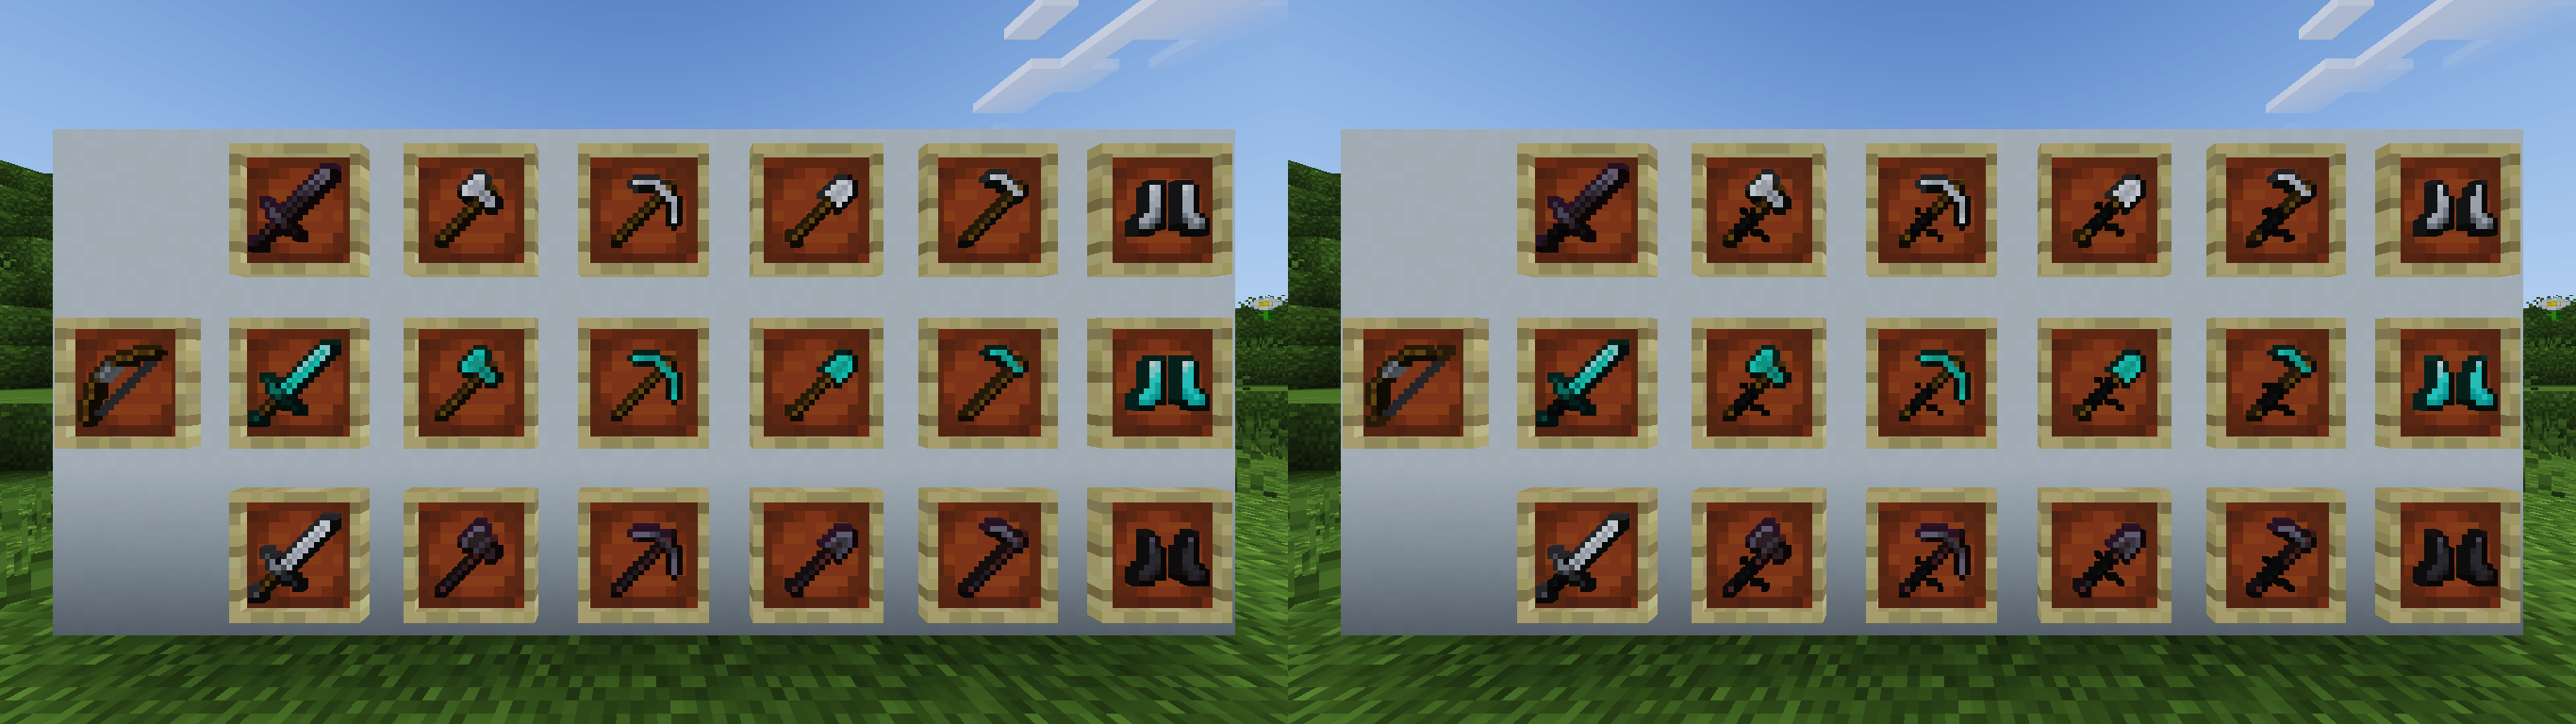 New Item Textures that give the feeling of textures from old resource packs for pvp in 1.8